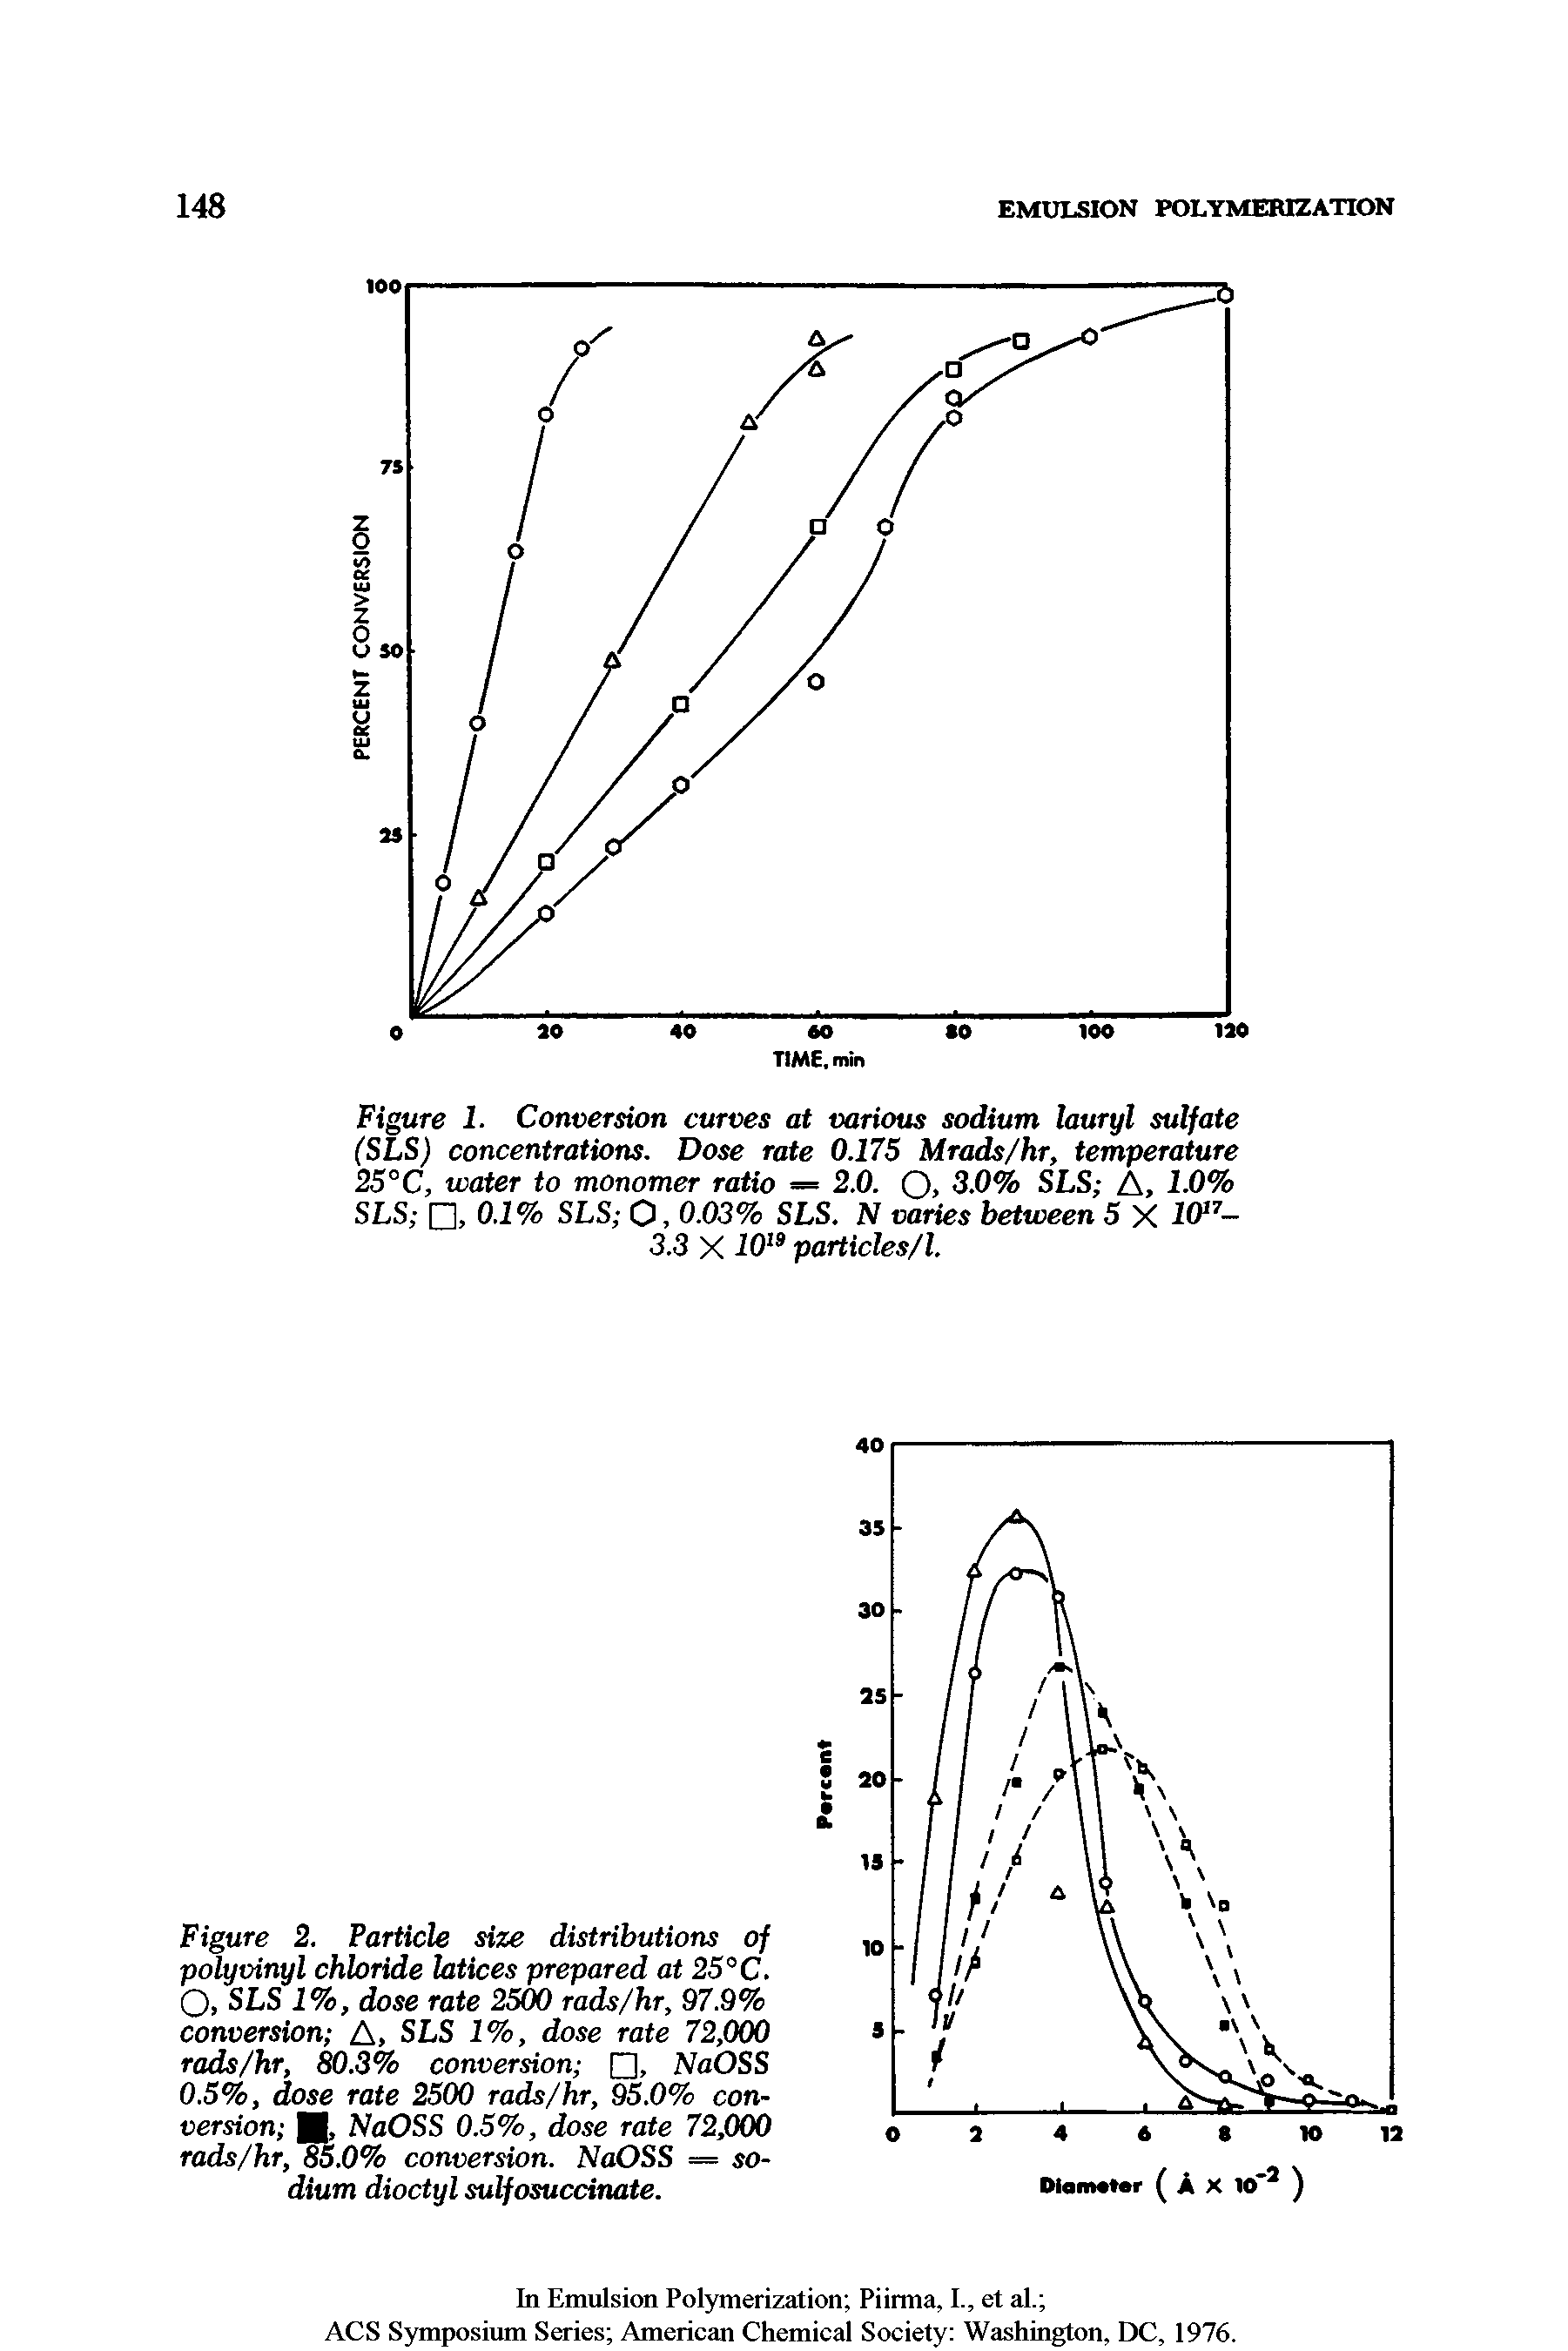 Figure 2. Particle size distributions of polyvinyl chloride latices prepared at 25°C. O, SLS 1%, dose rate 2500 rads/hr, 97.9% conversion A, SLS 1%, dose rate 72,000 rads/hr, 80.3% conversion , NaOSS 0.5%, dose rate 2500 rads/hr, 95.0% conversion I, NaOSS 0.5%, dose rate 72,000 rads/hr, 85.0% conversion. NaOSS = sodium dioctyl sulfosuccinate.